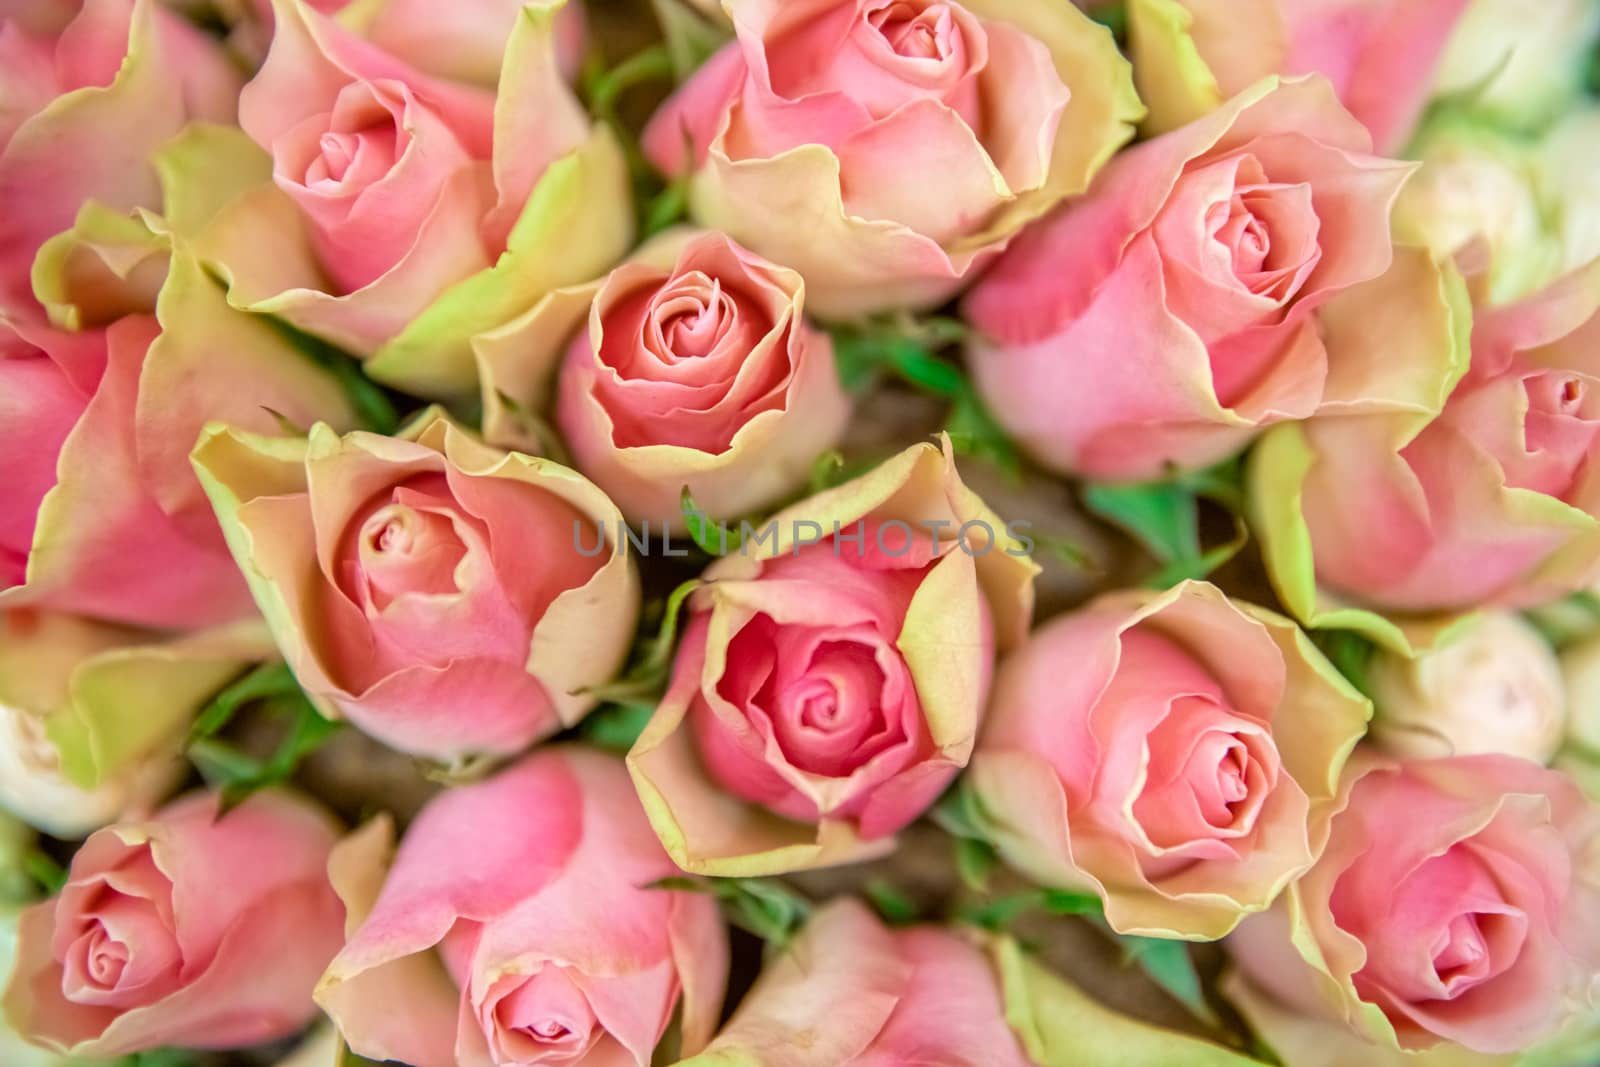 bouquet of colorful fresh roses in flower shop.